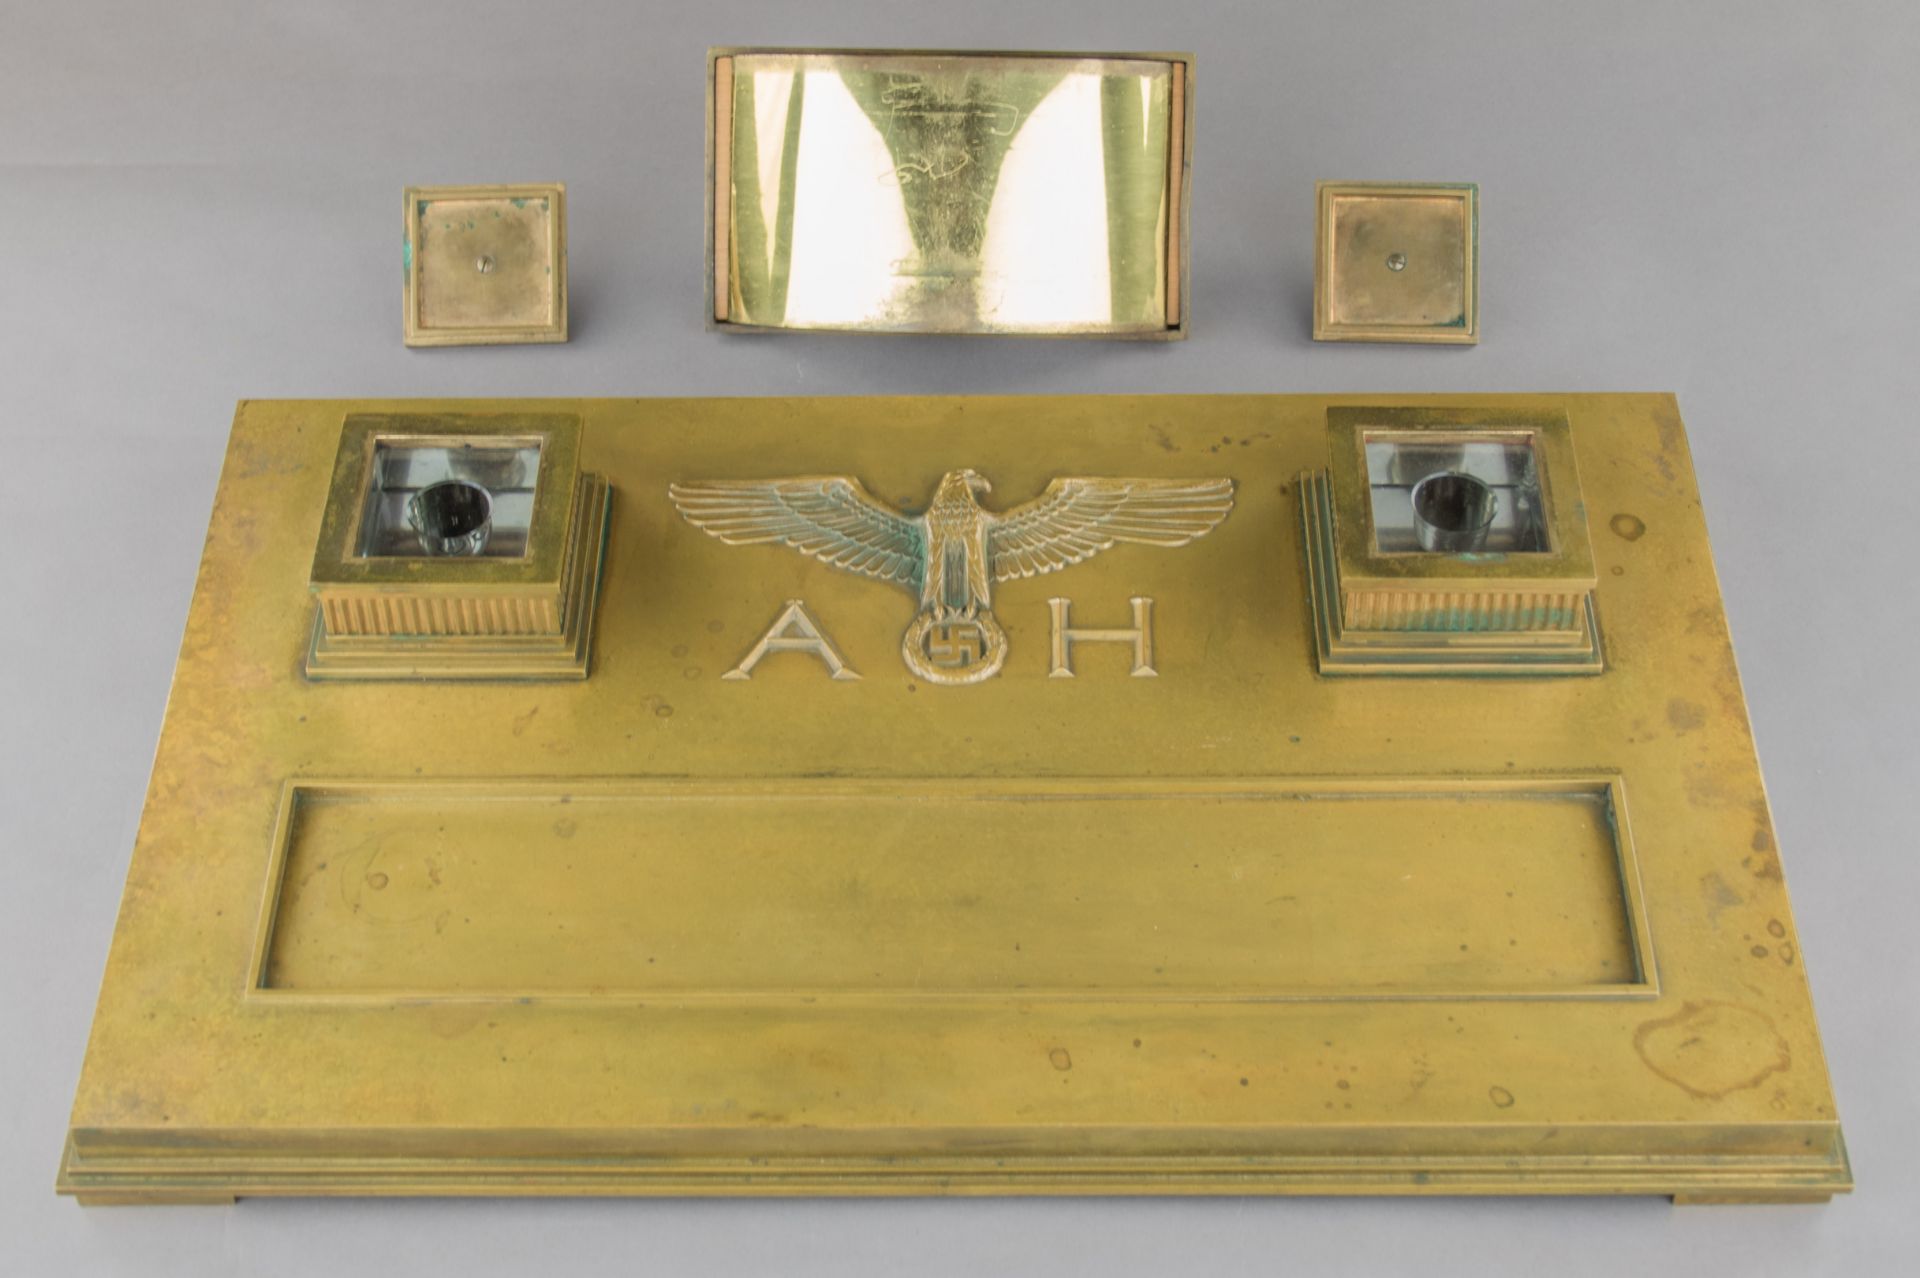 ADOLF HITLER'S CEREMONIAL DESK SET - USED IN THE SIGNING OF THE MUNICH PACT - Image 2 of 13